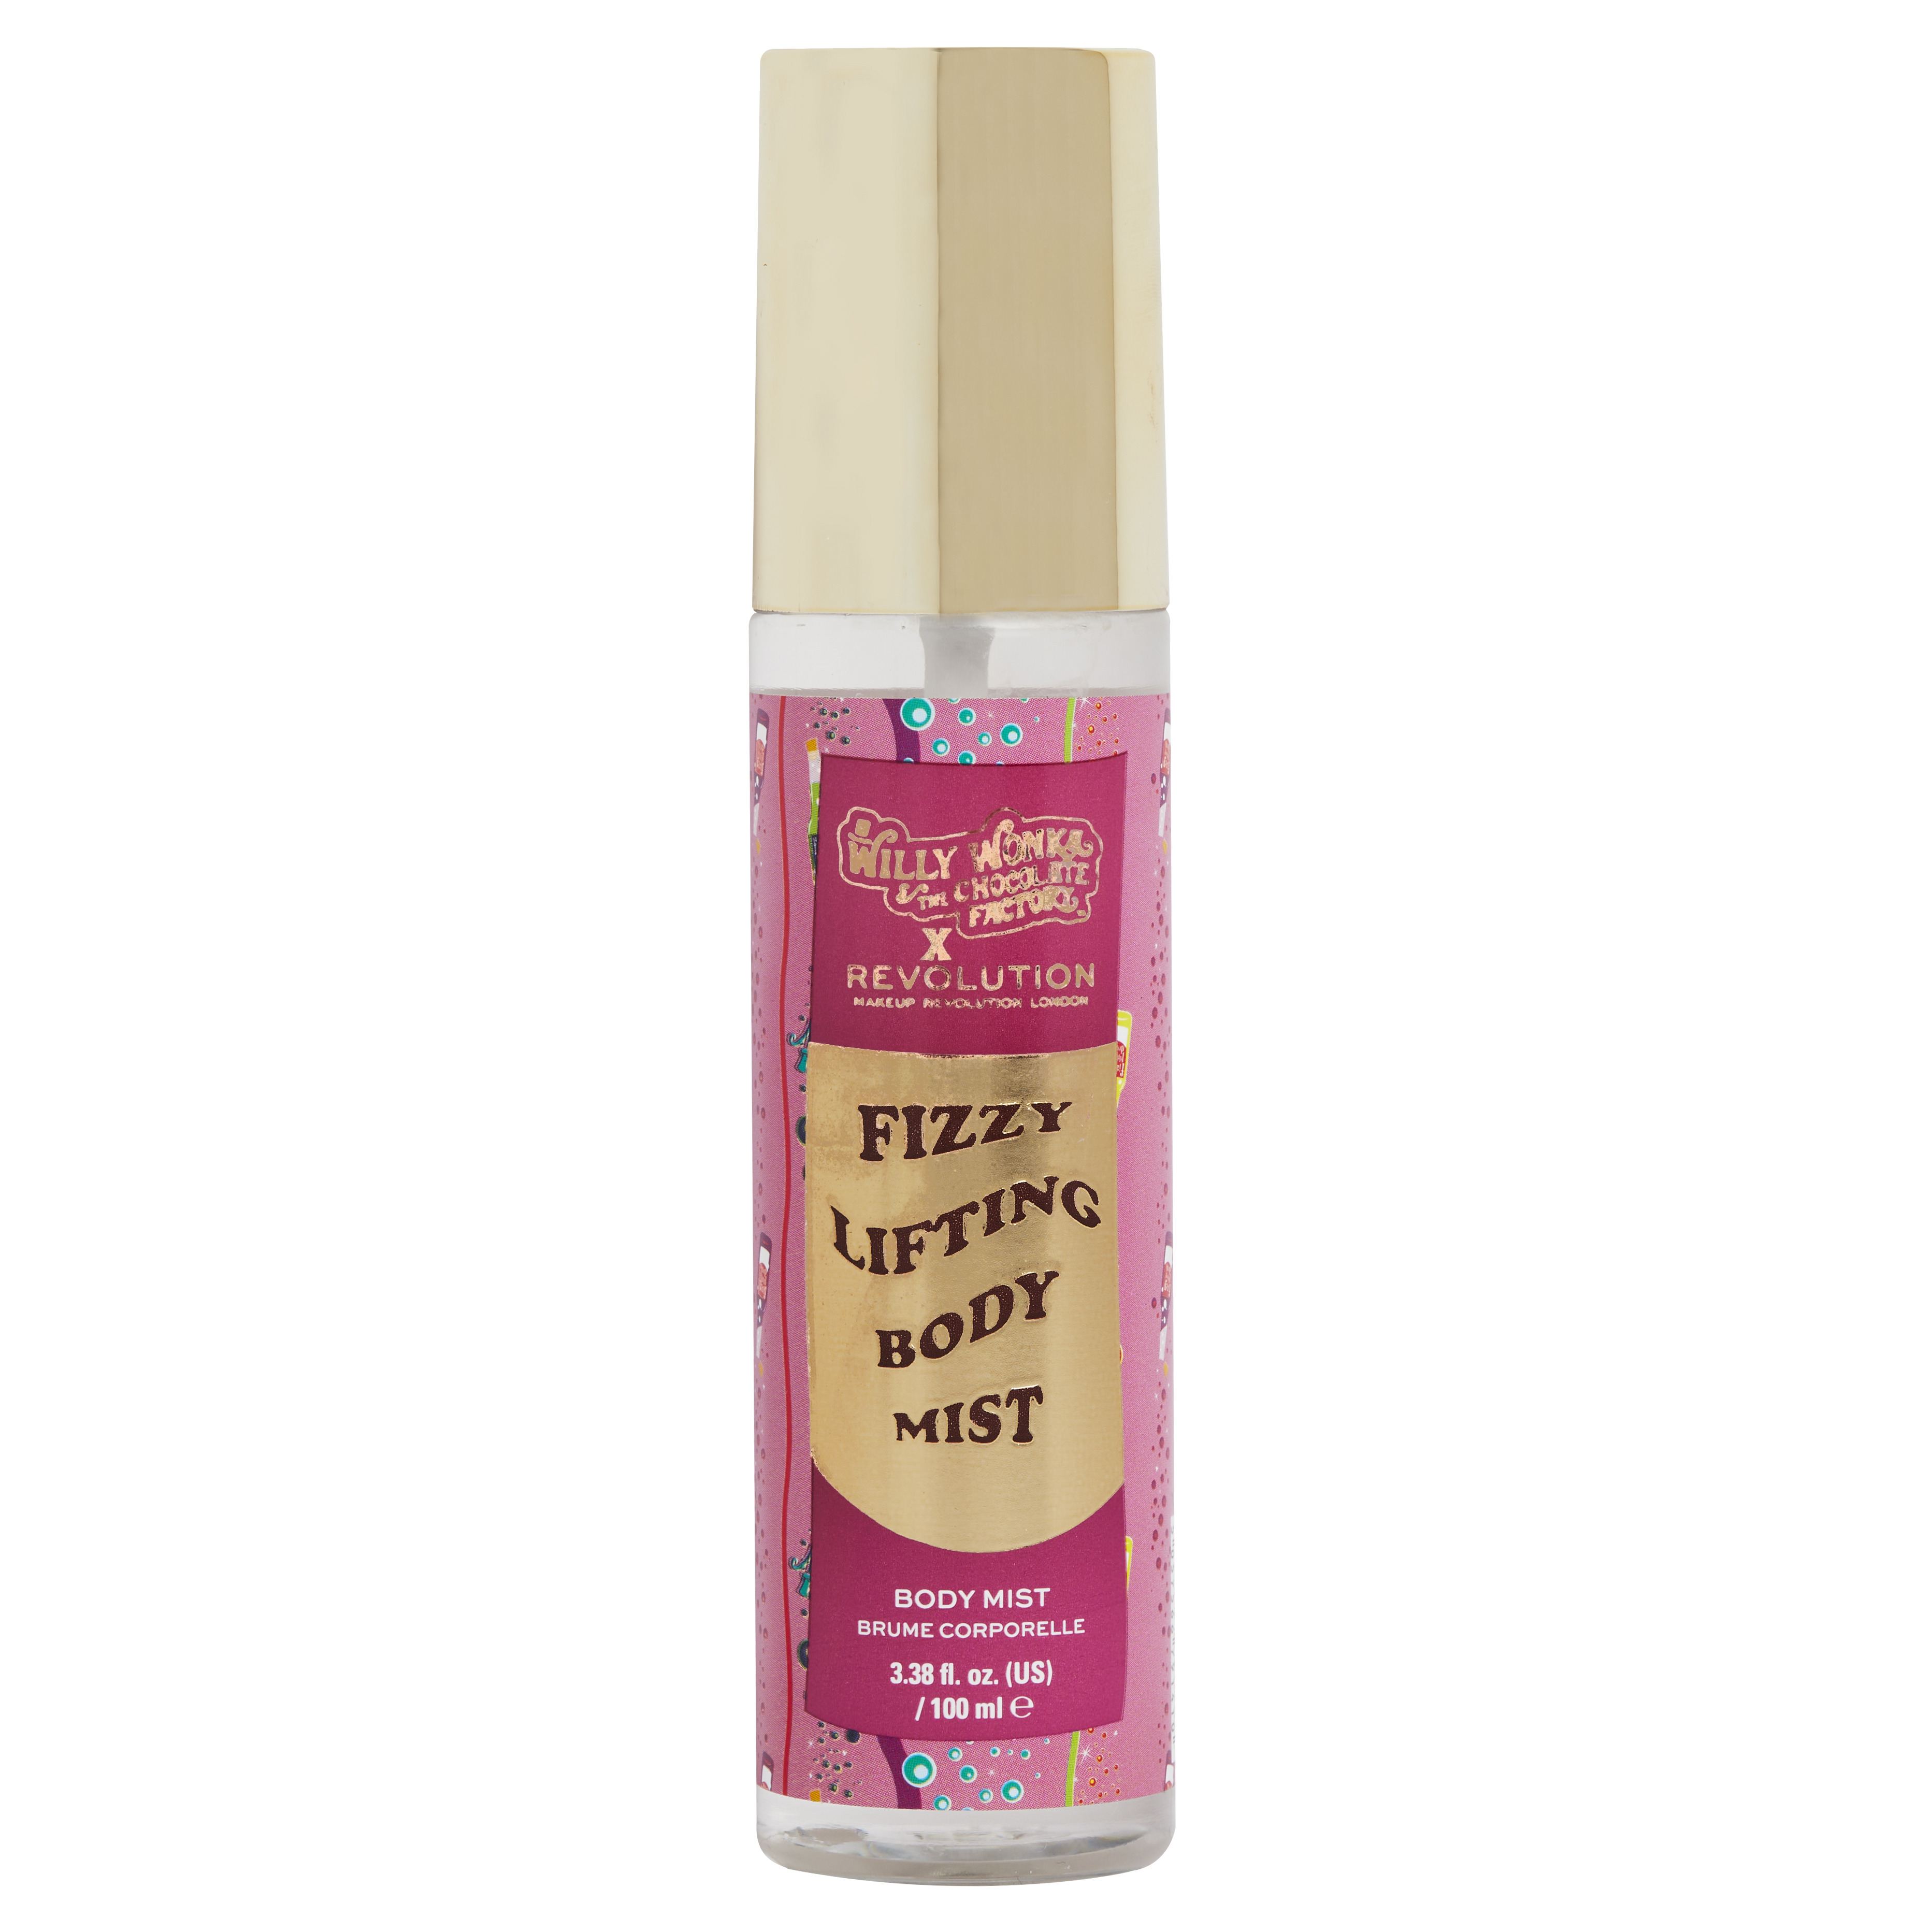 Willy Wonka & The Chocolate Factory x Revolution Fizzy Lifting Body Mist